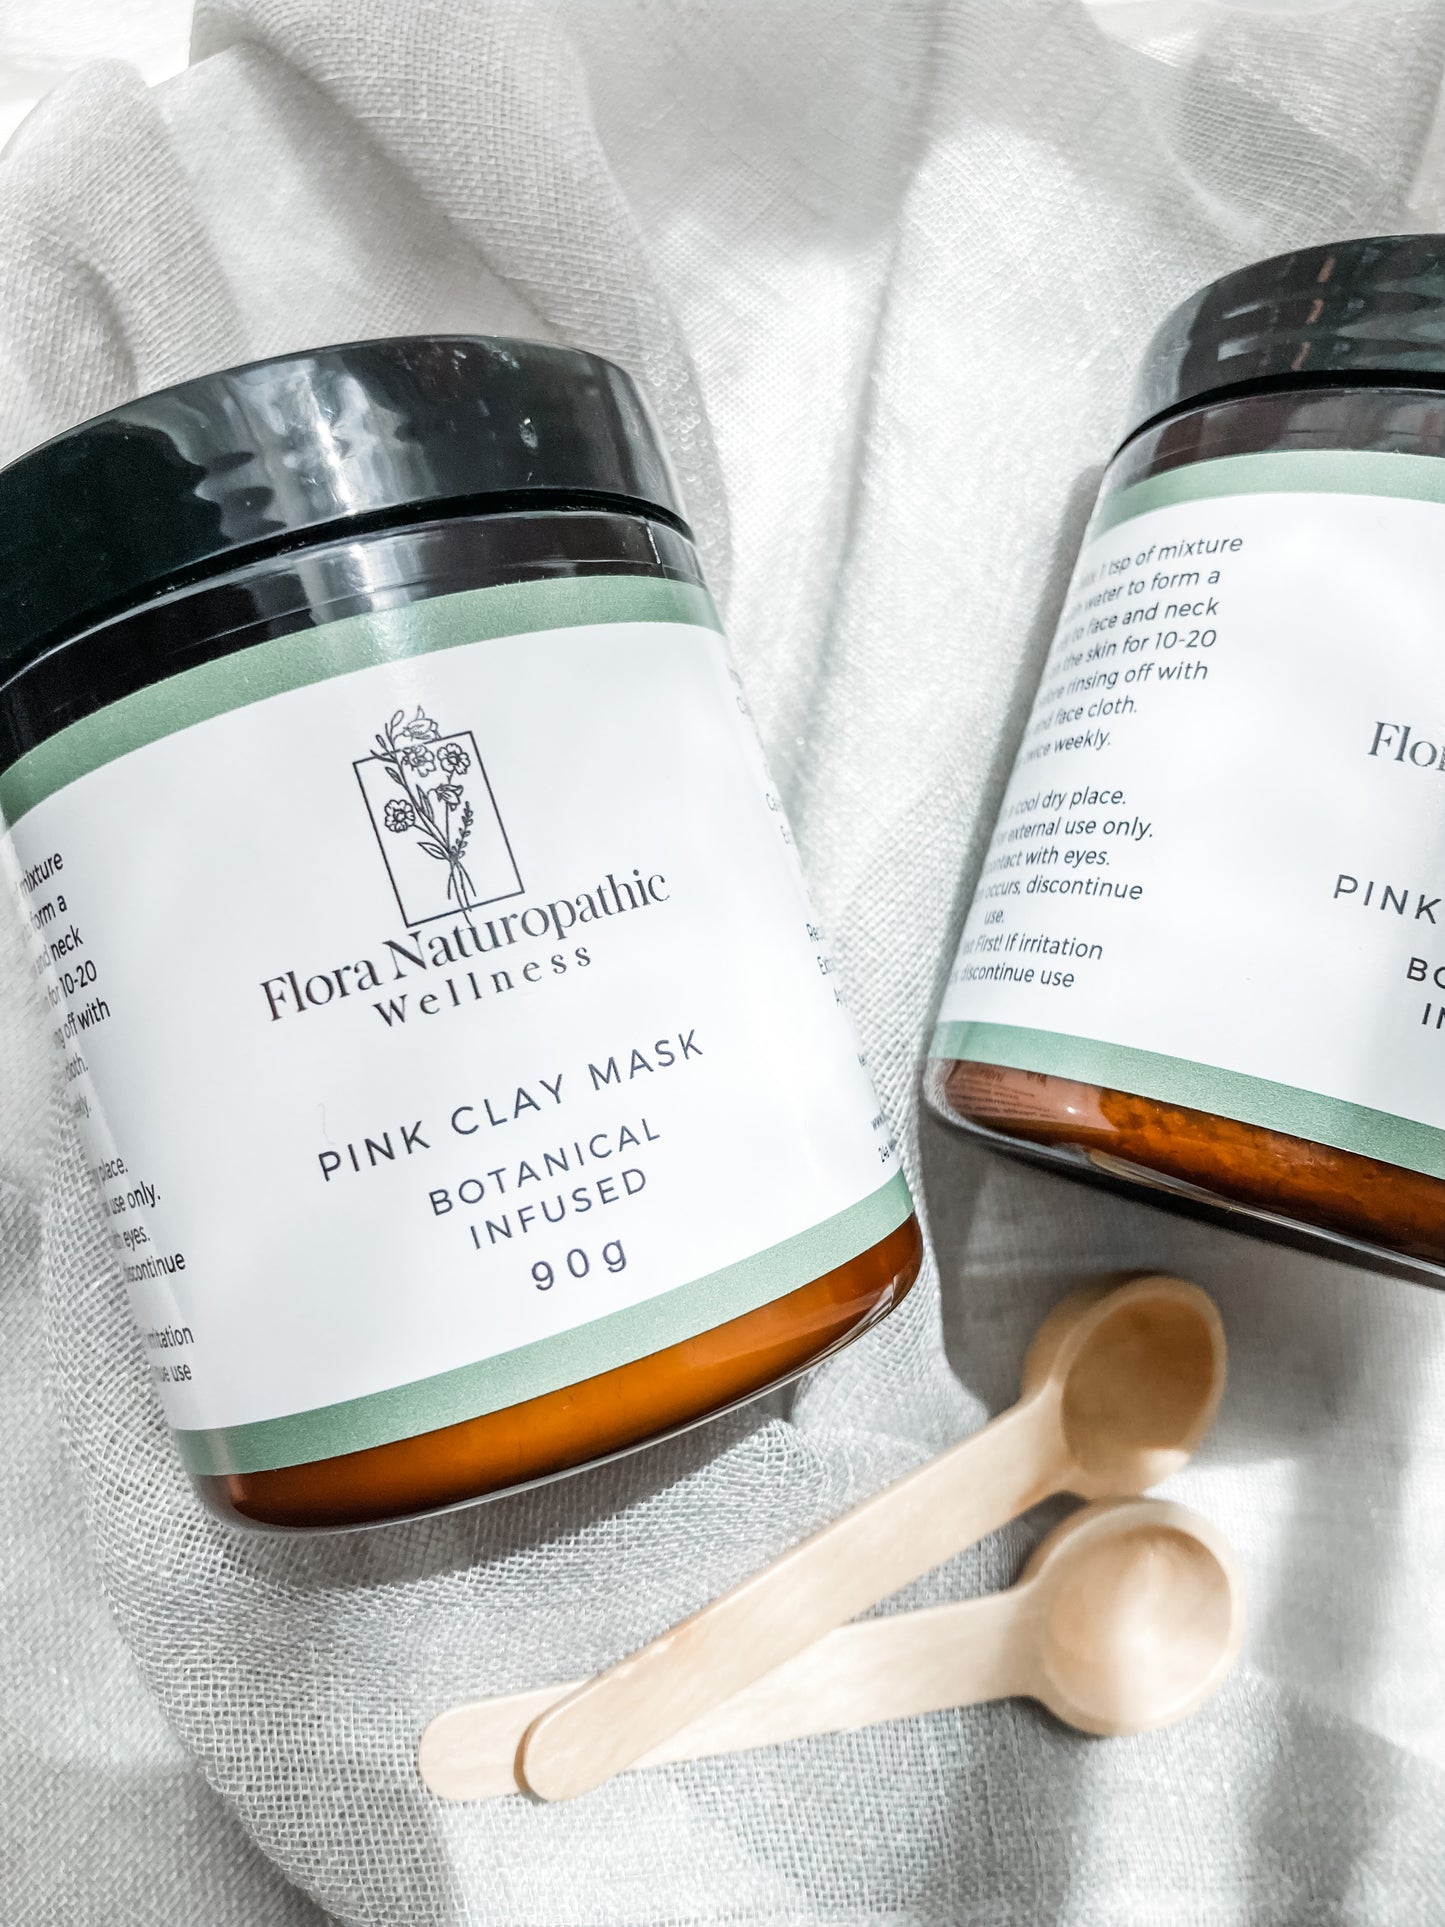 Botanical Infused Pink Clay Mask